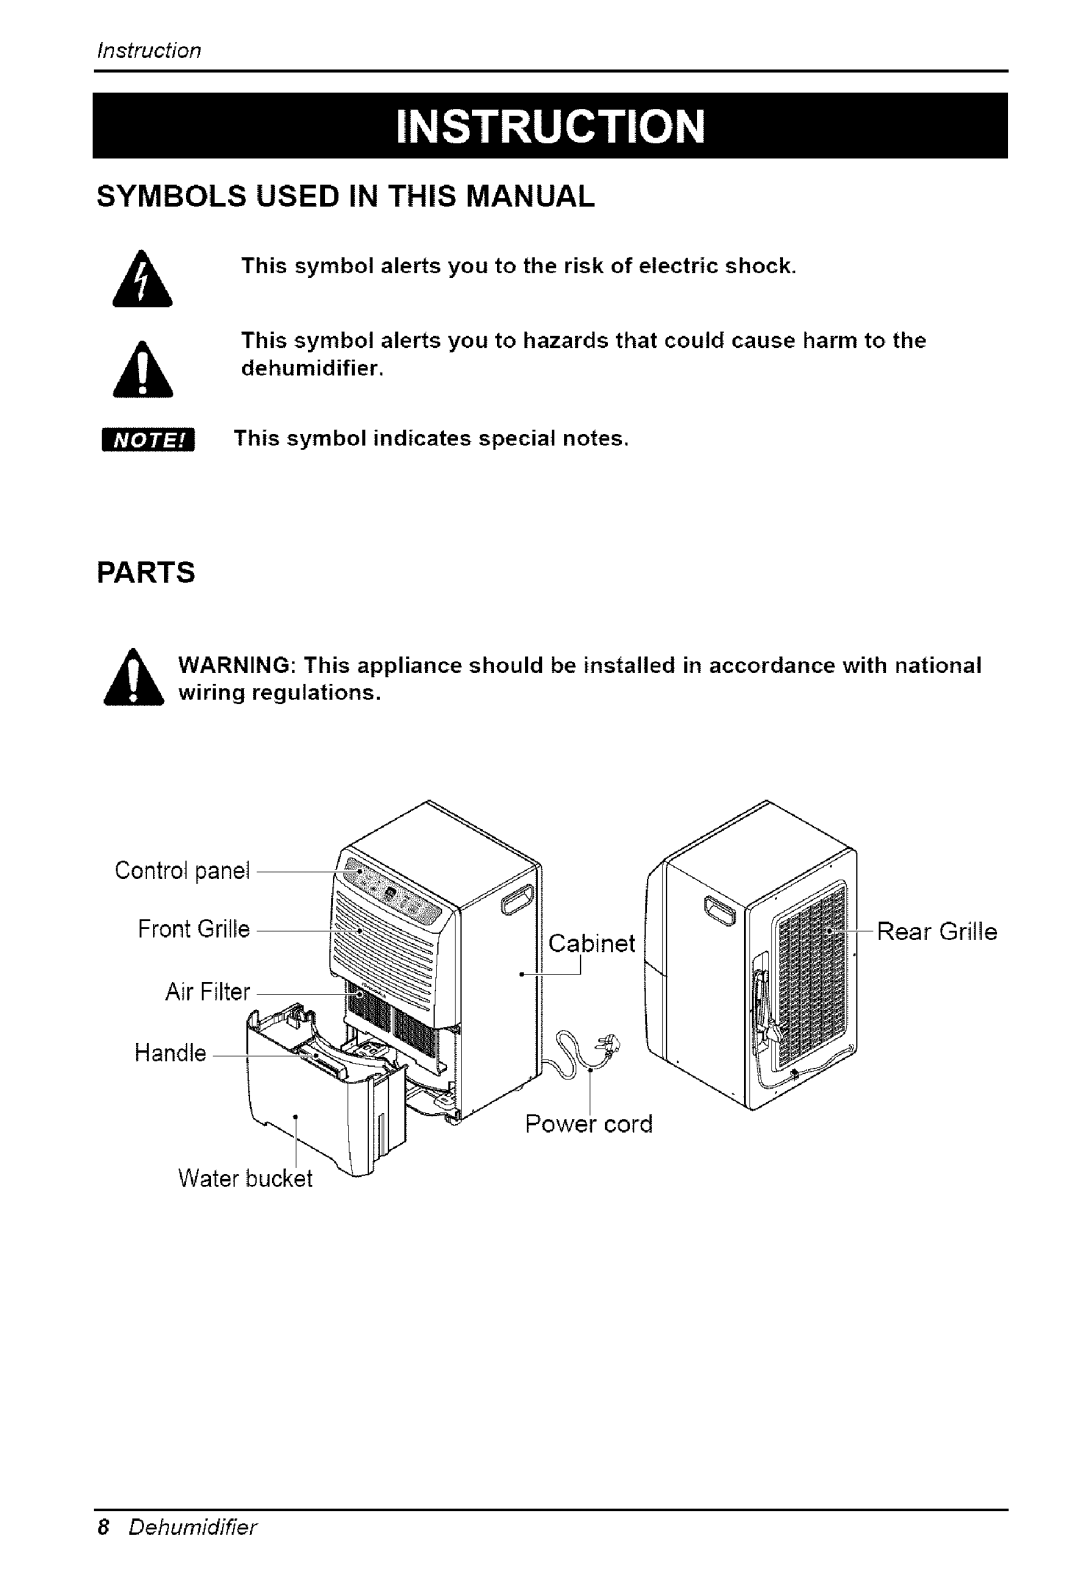 Friedrich D65C Symbols Used In This Manual, Parts, Control panel Front Grille Air Filter Handle, Cabinet, Instruction 